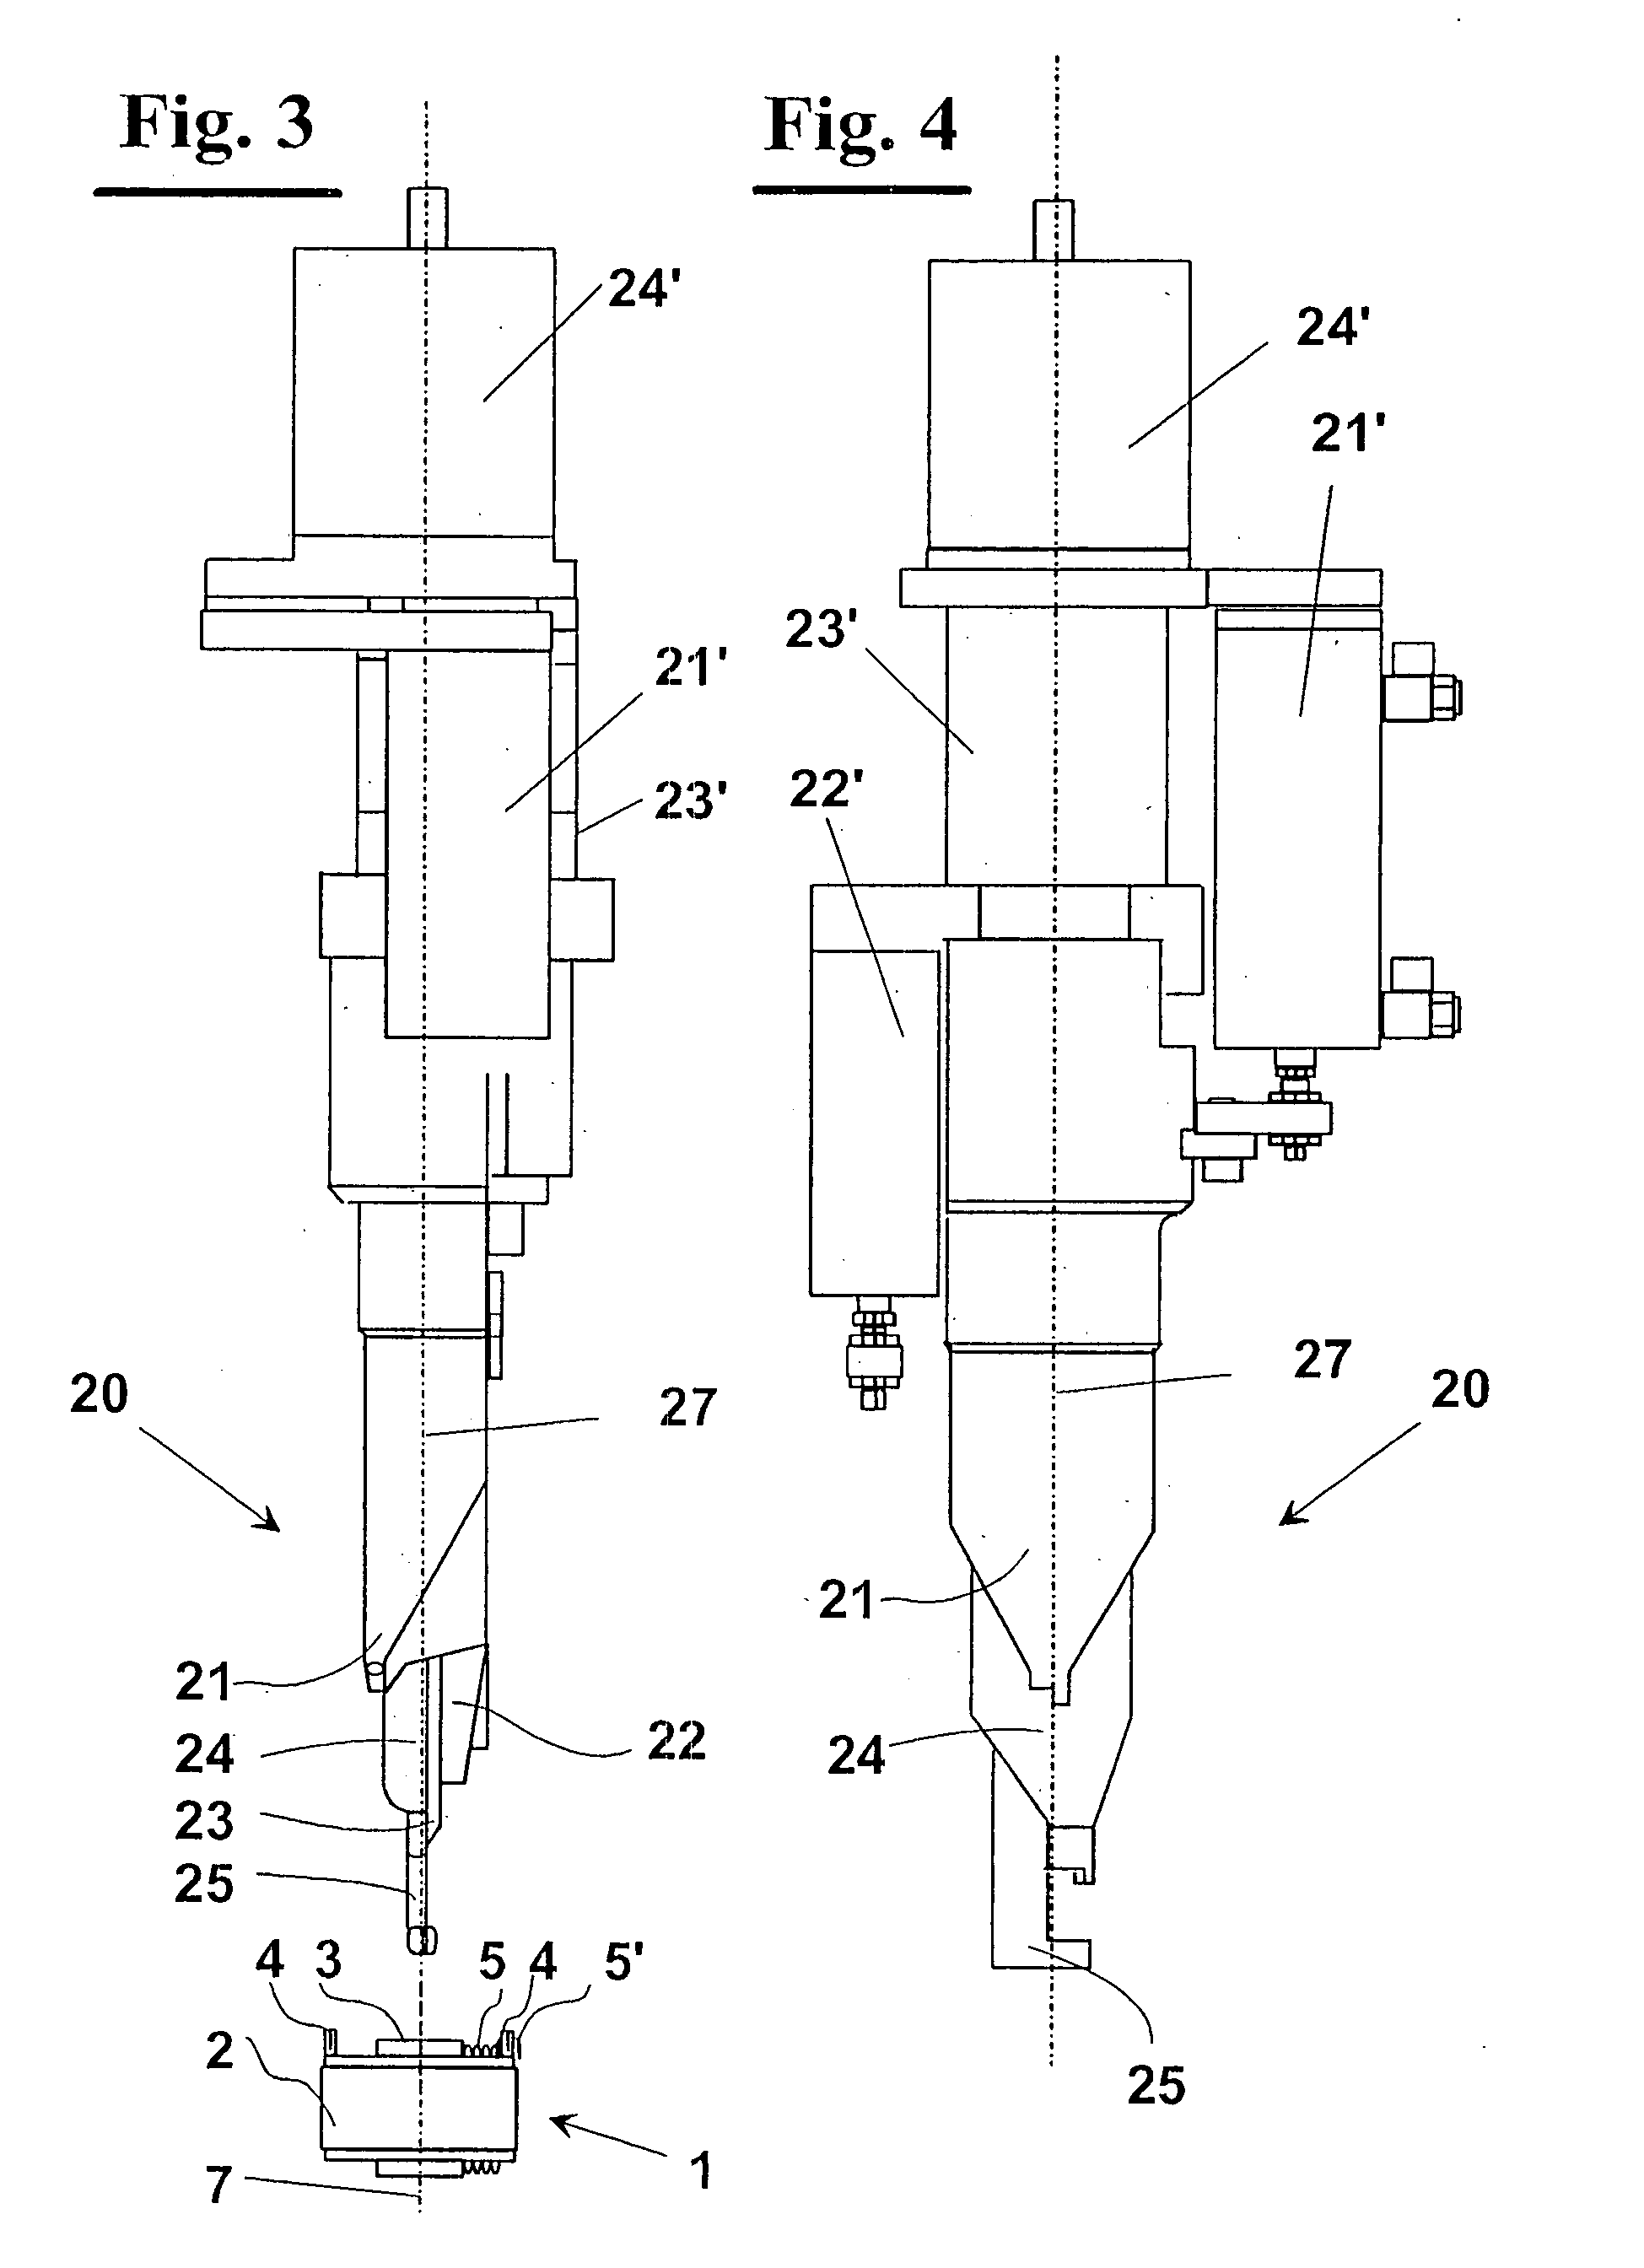 Method and apparatus for wire termination on outwardly spooled multi-pole stators